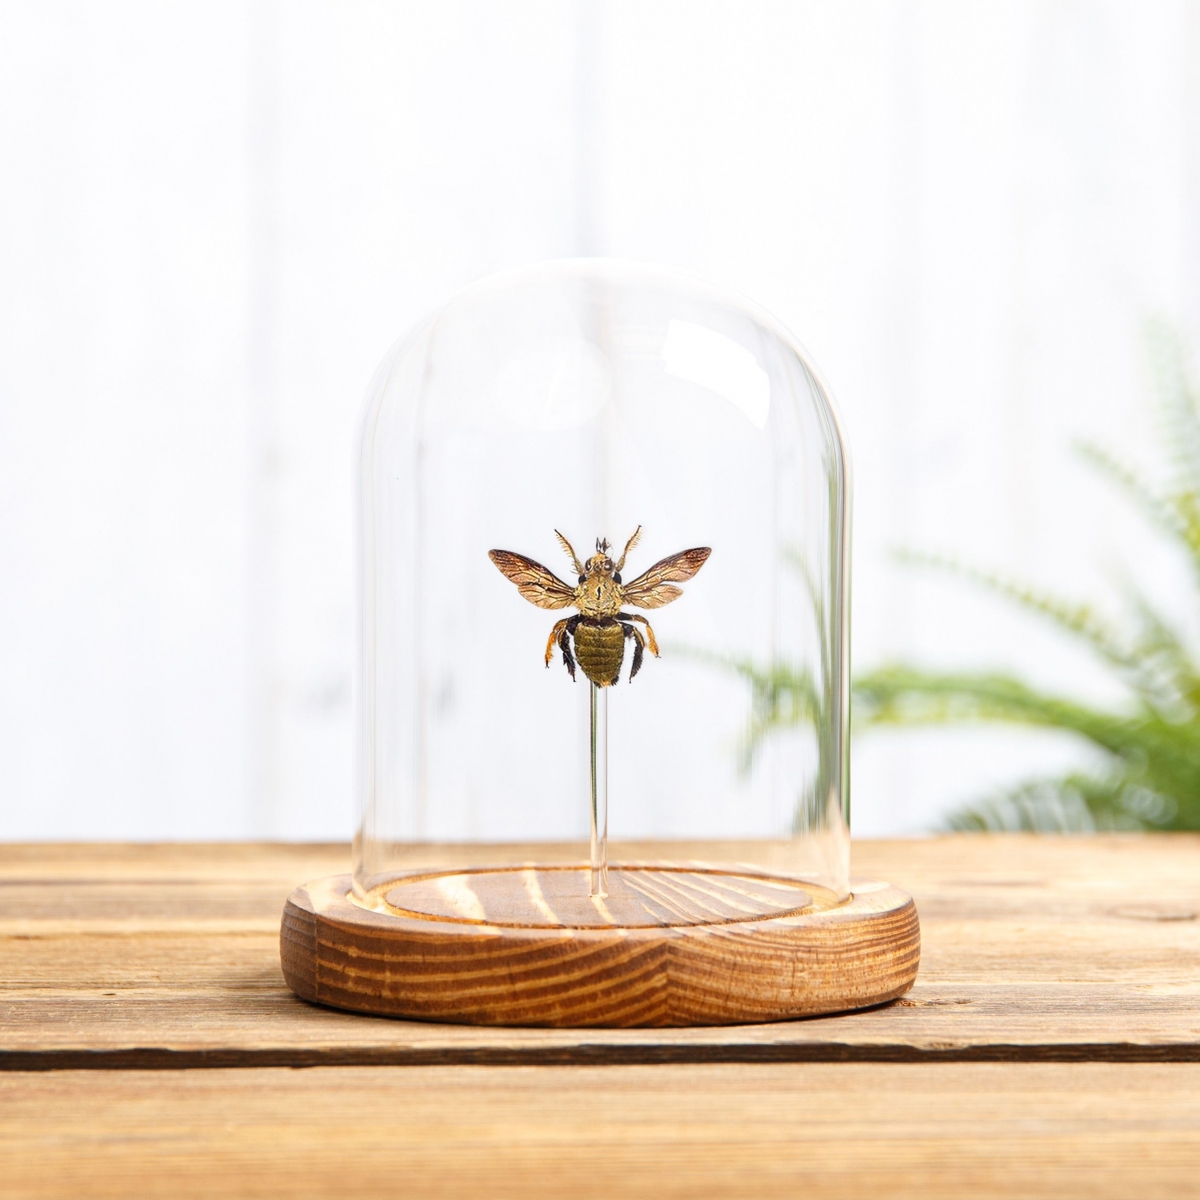 The Carpenter Bee in Glass Dome with Wooden Base  (Xylocopa confusa)